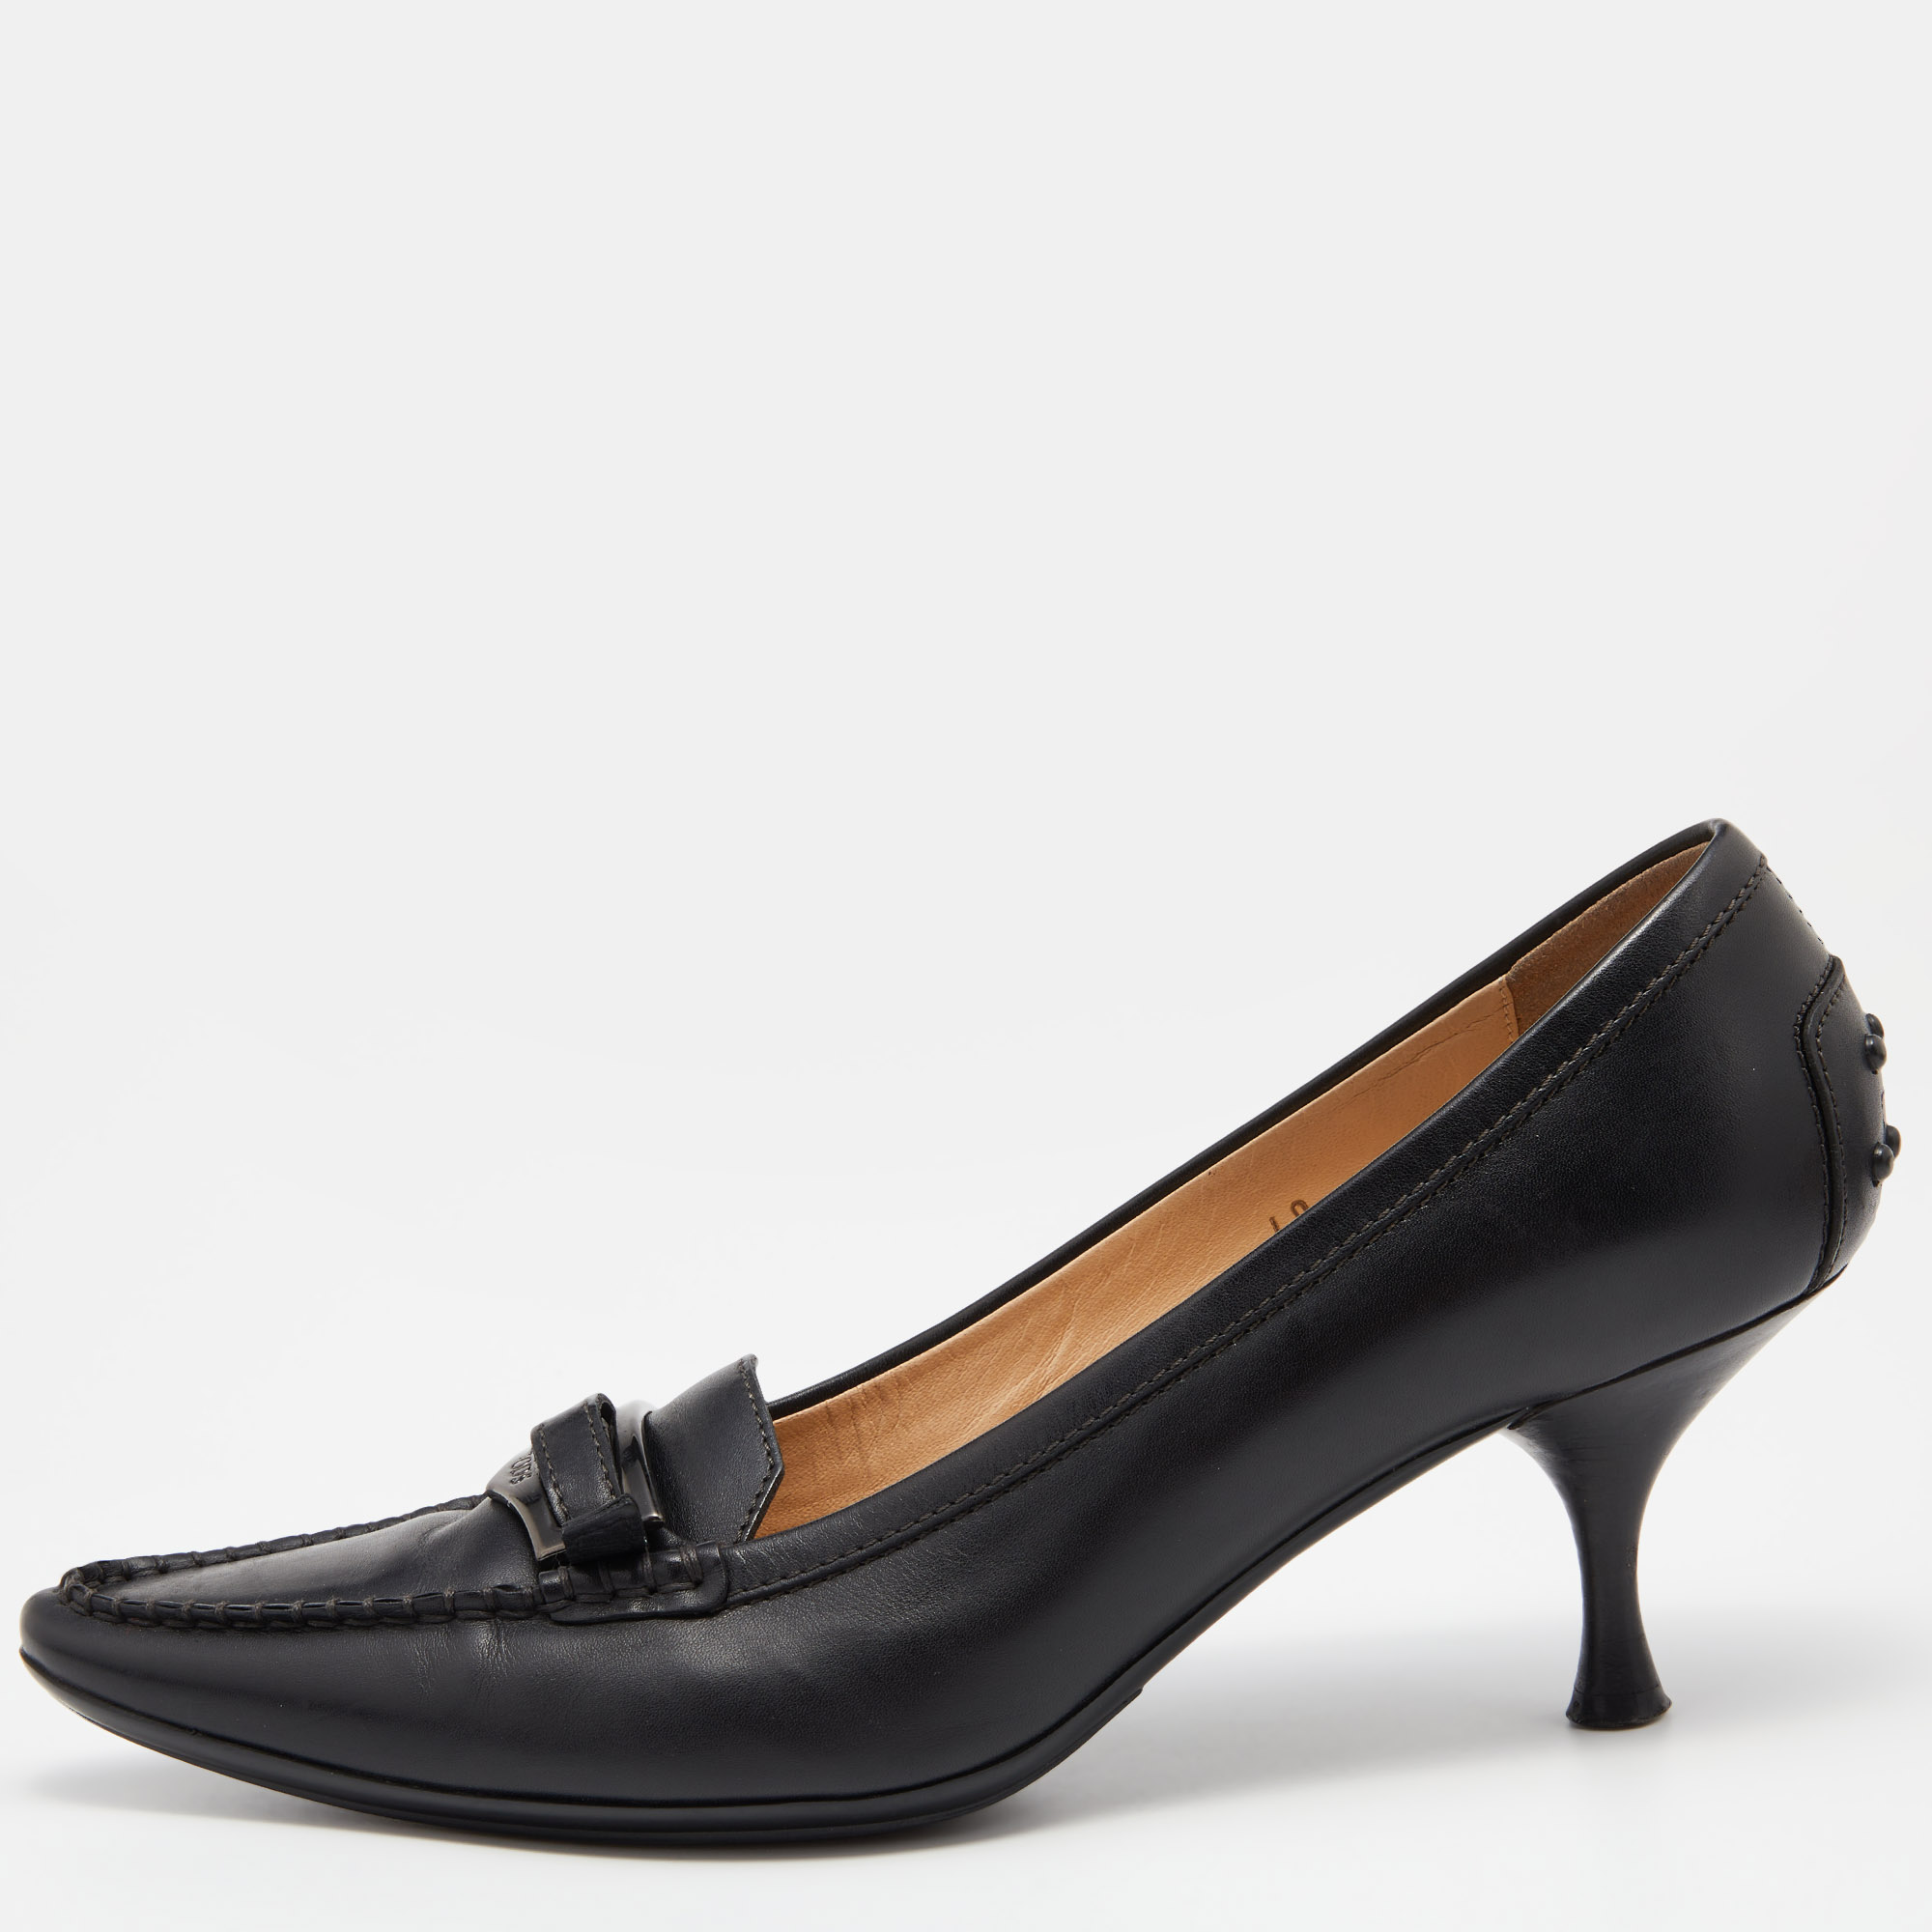 Tod's Black Leather Pointed Toe Loafer Pumps Size 40